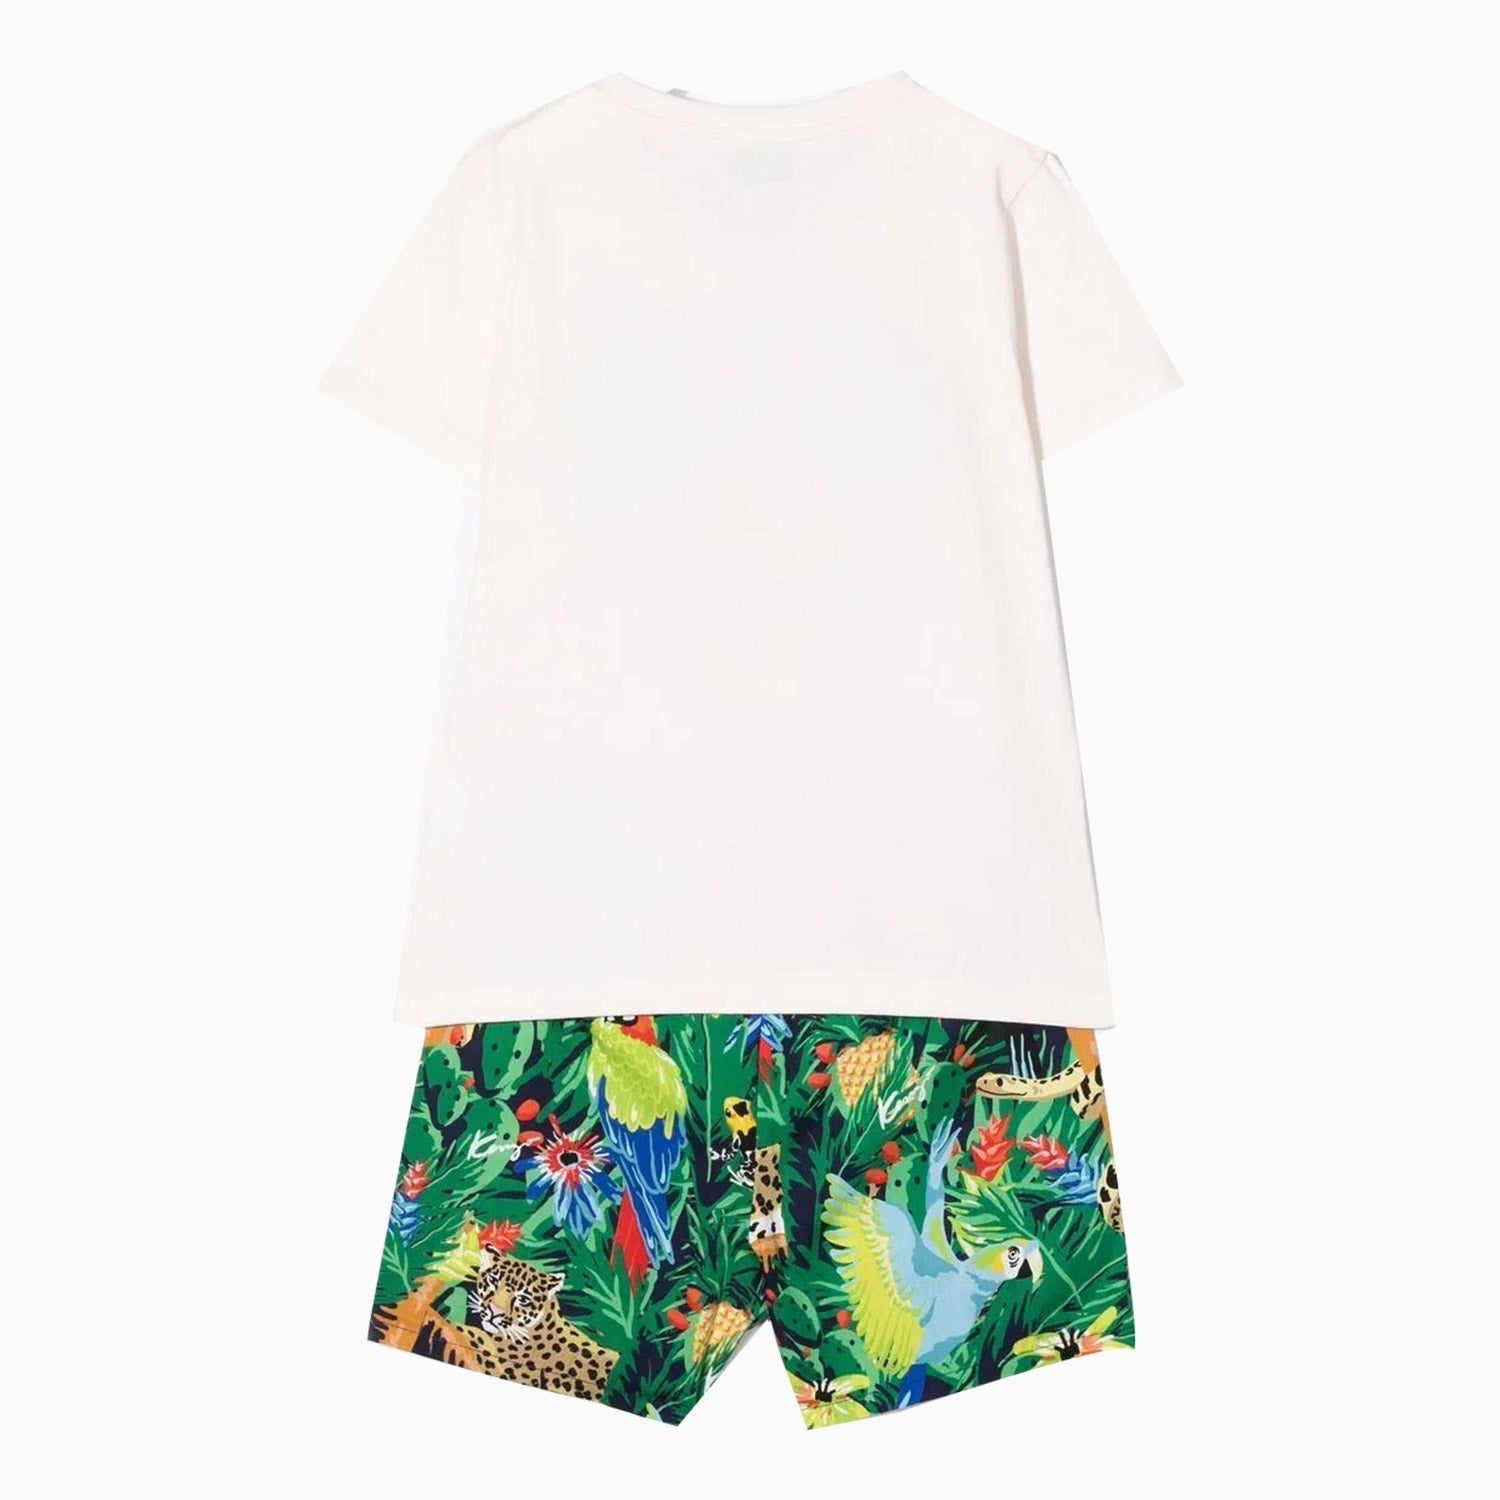 Kenzo Kid's Tropical Print Outfit Toddlers - Color: Off White - Kids Premium Clothing -